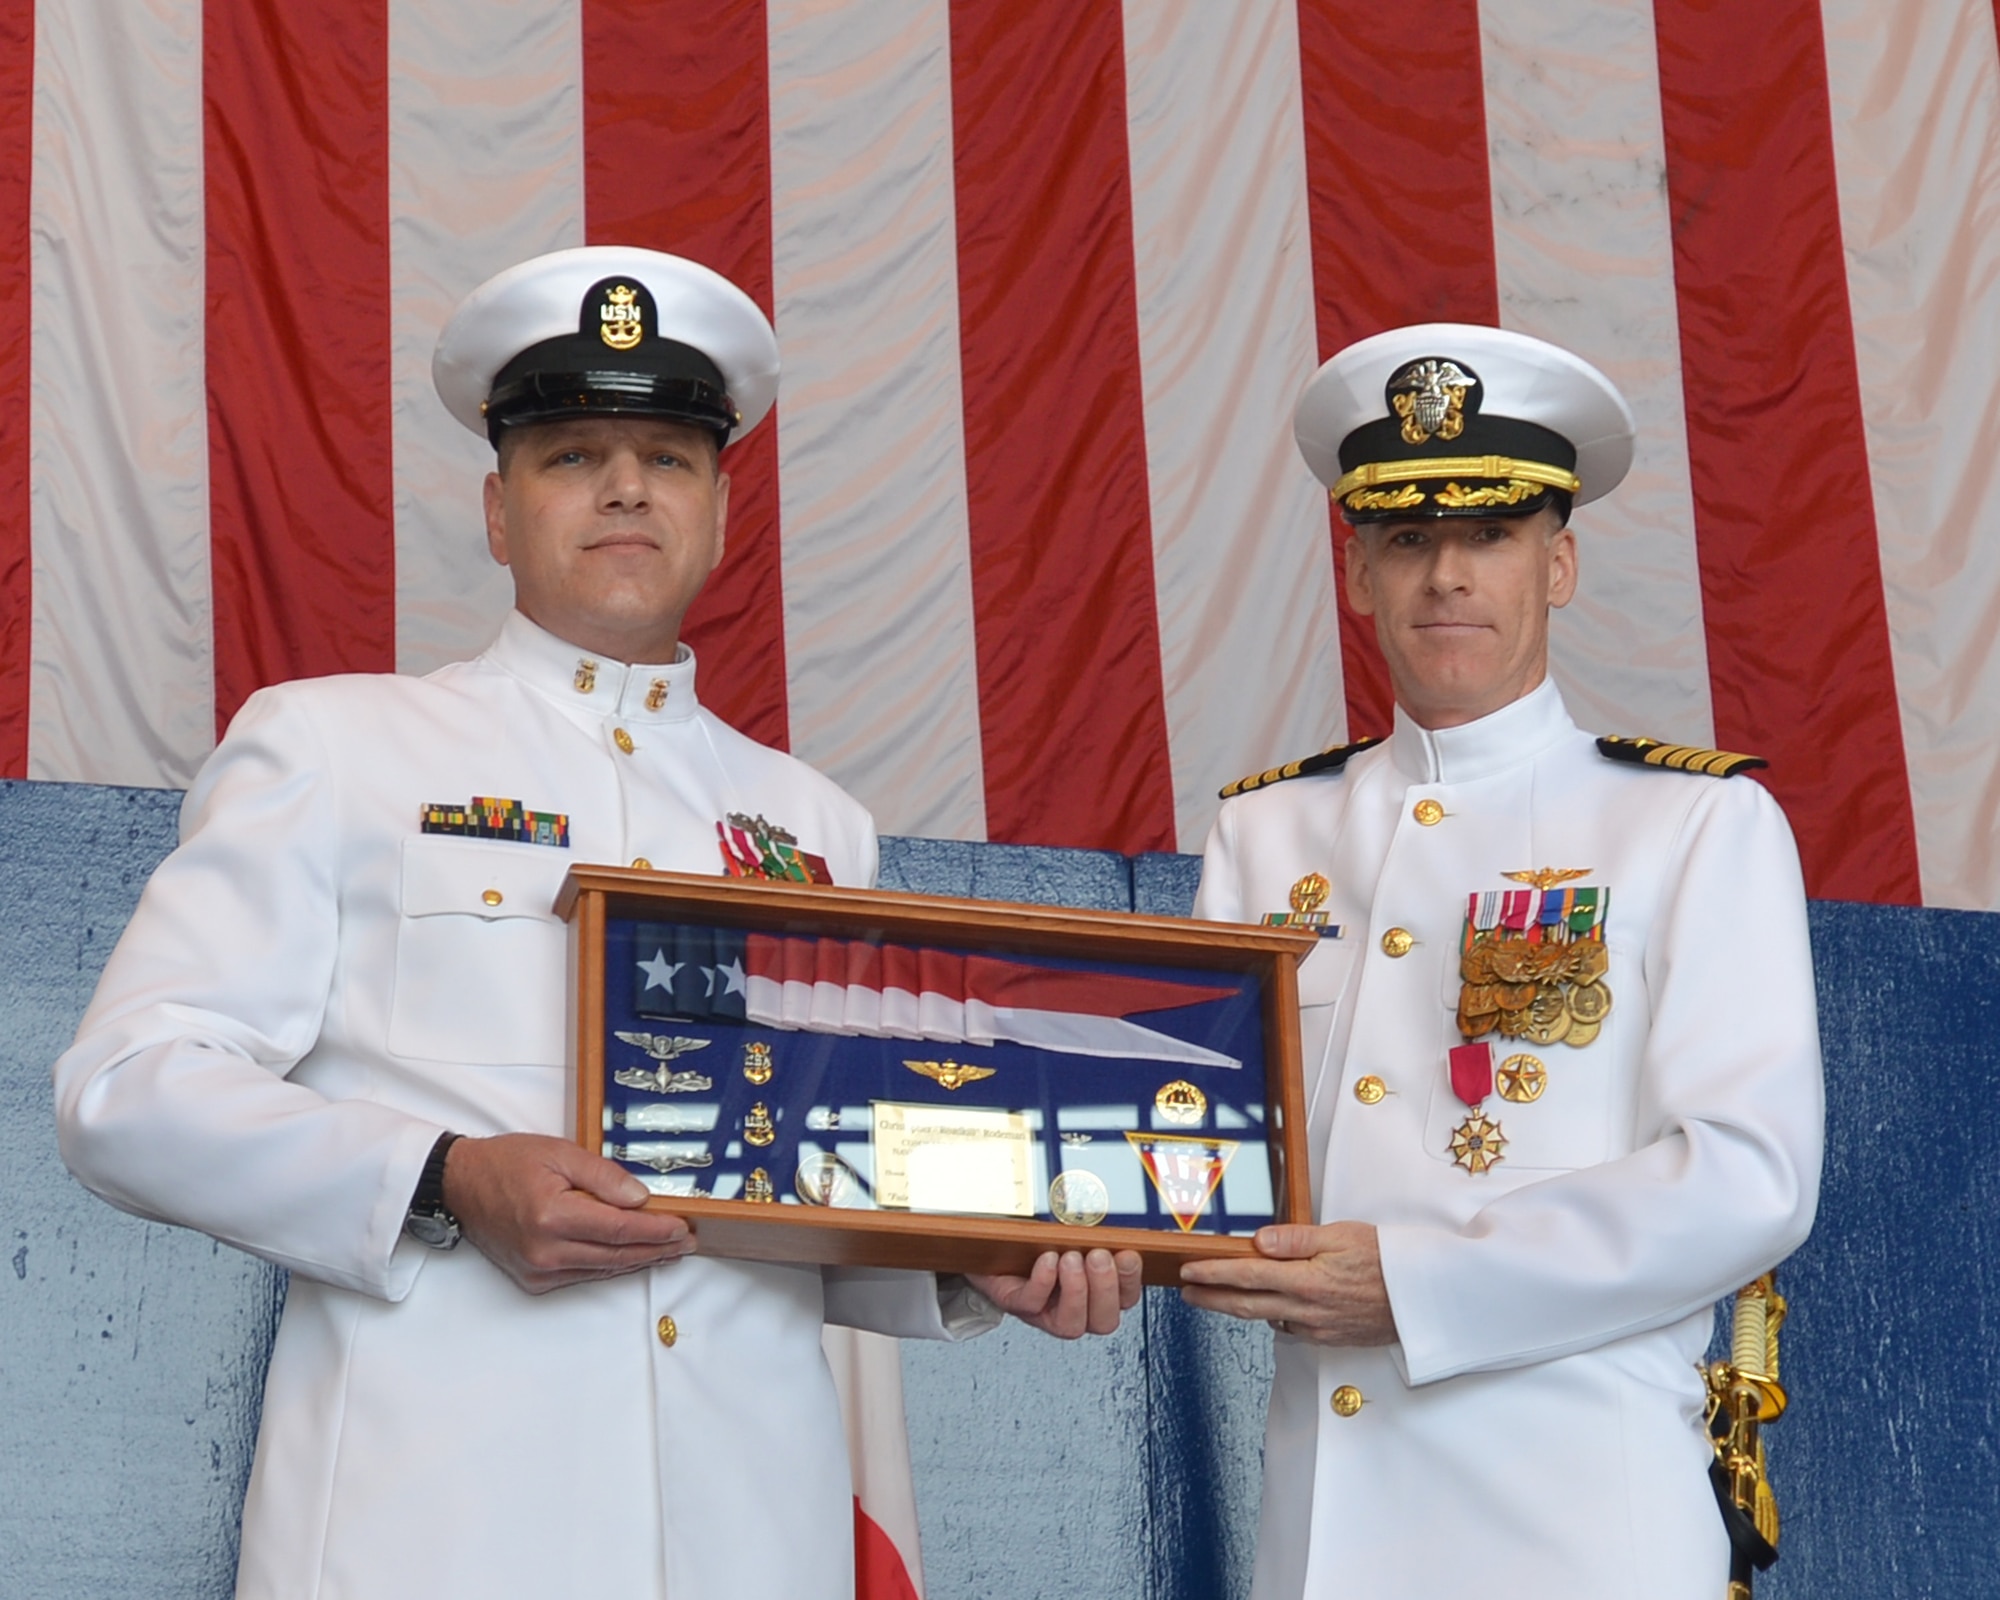 Naval Air Facility (NAF) Misawa Command Master Chief Scott Knorowski, left, originally from Jersey City, New Jersey, presents NAF Misawa Commanding Officer Capt. Chris Rodeman, a native of Anderson, Indiana, with a commissioning pennant box on behalf of the command’s chief mess, June 20, 0214.  Knorowski presented the gift during NAF Misawa's Change of Command Ceremony, in which Capt. Keith Henry assumed command from Rodeman. NAF Misawa is a U.S. naval installation located in northern Japan. (U.S. Navy photo by Mass Communication Specialist 3rd Class Erin Devenberg/Released)